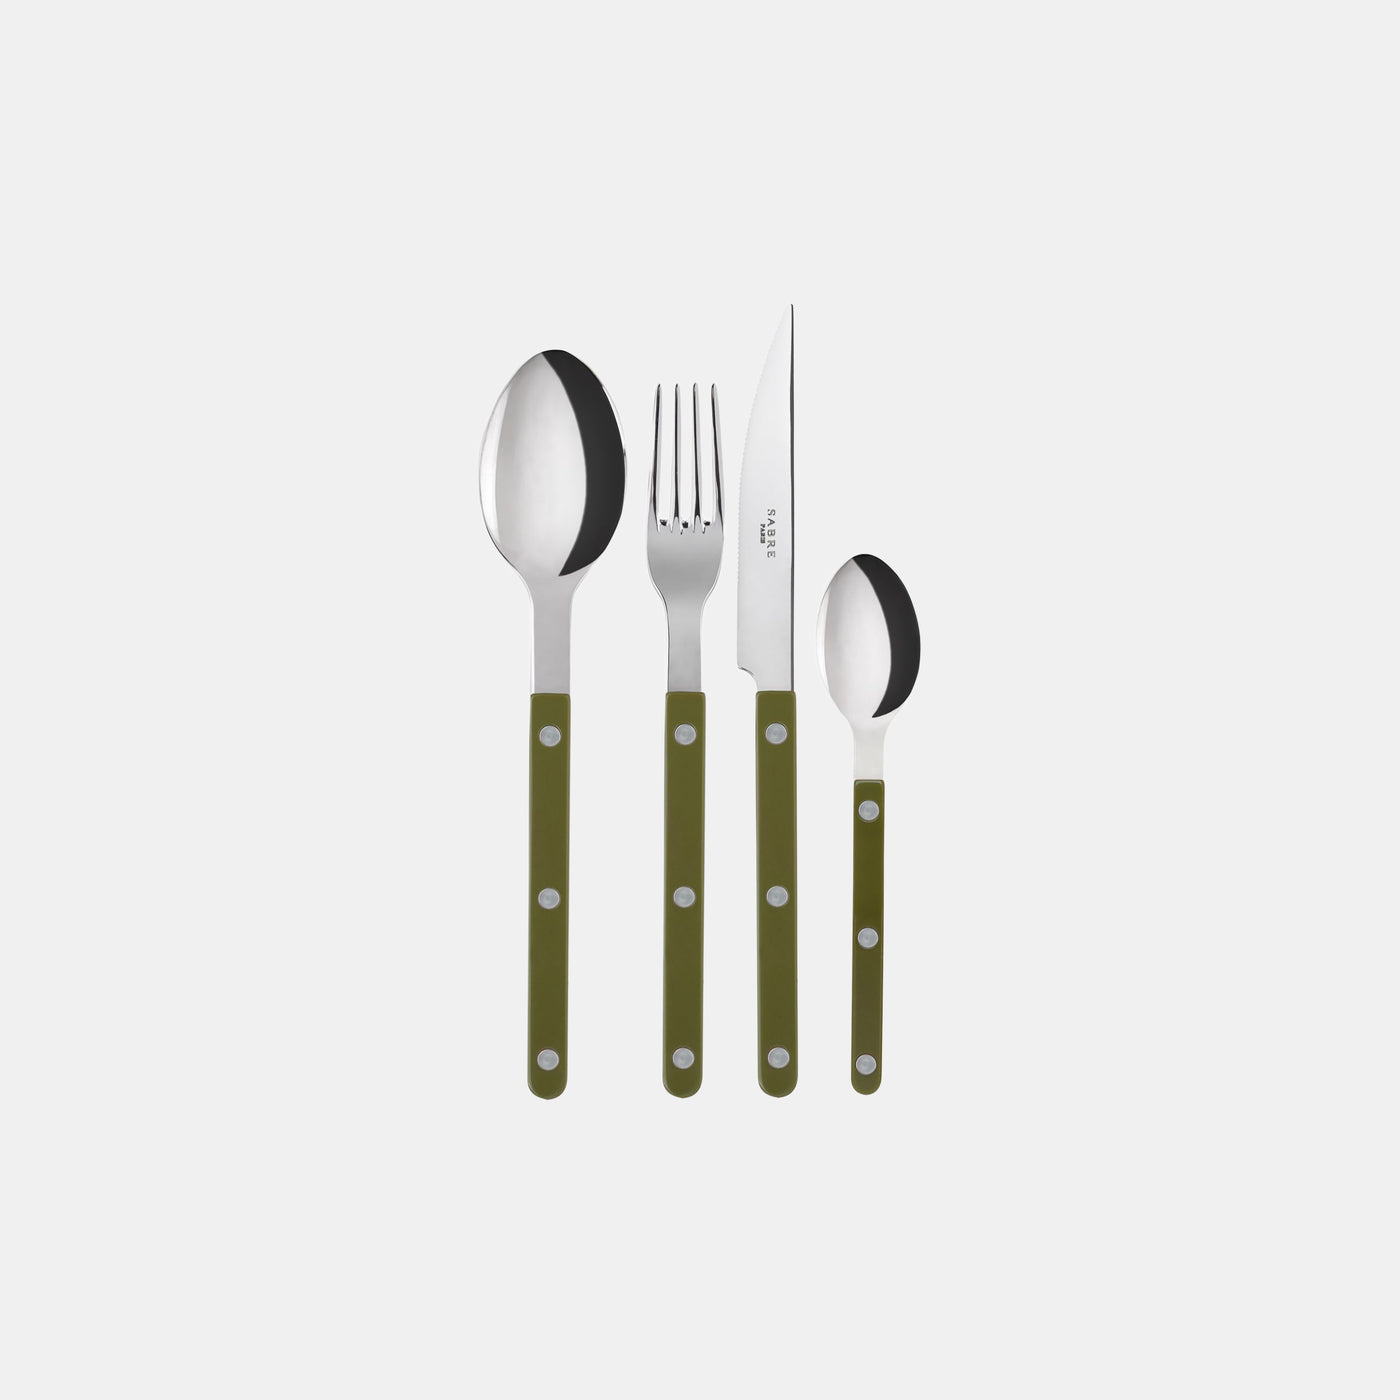 Bistrot shiny solid 4 pieces set - Green fern